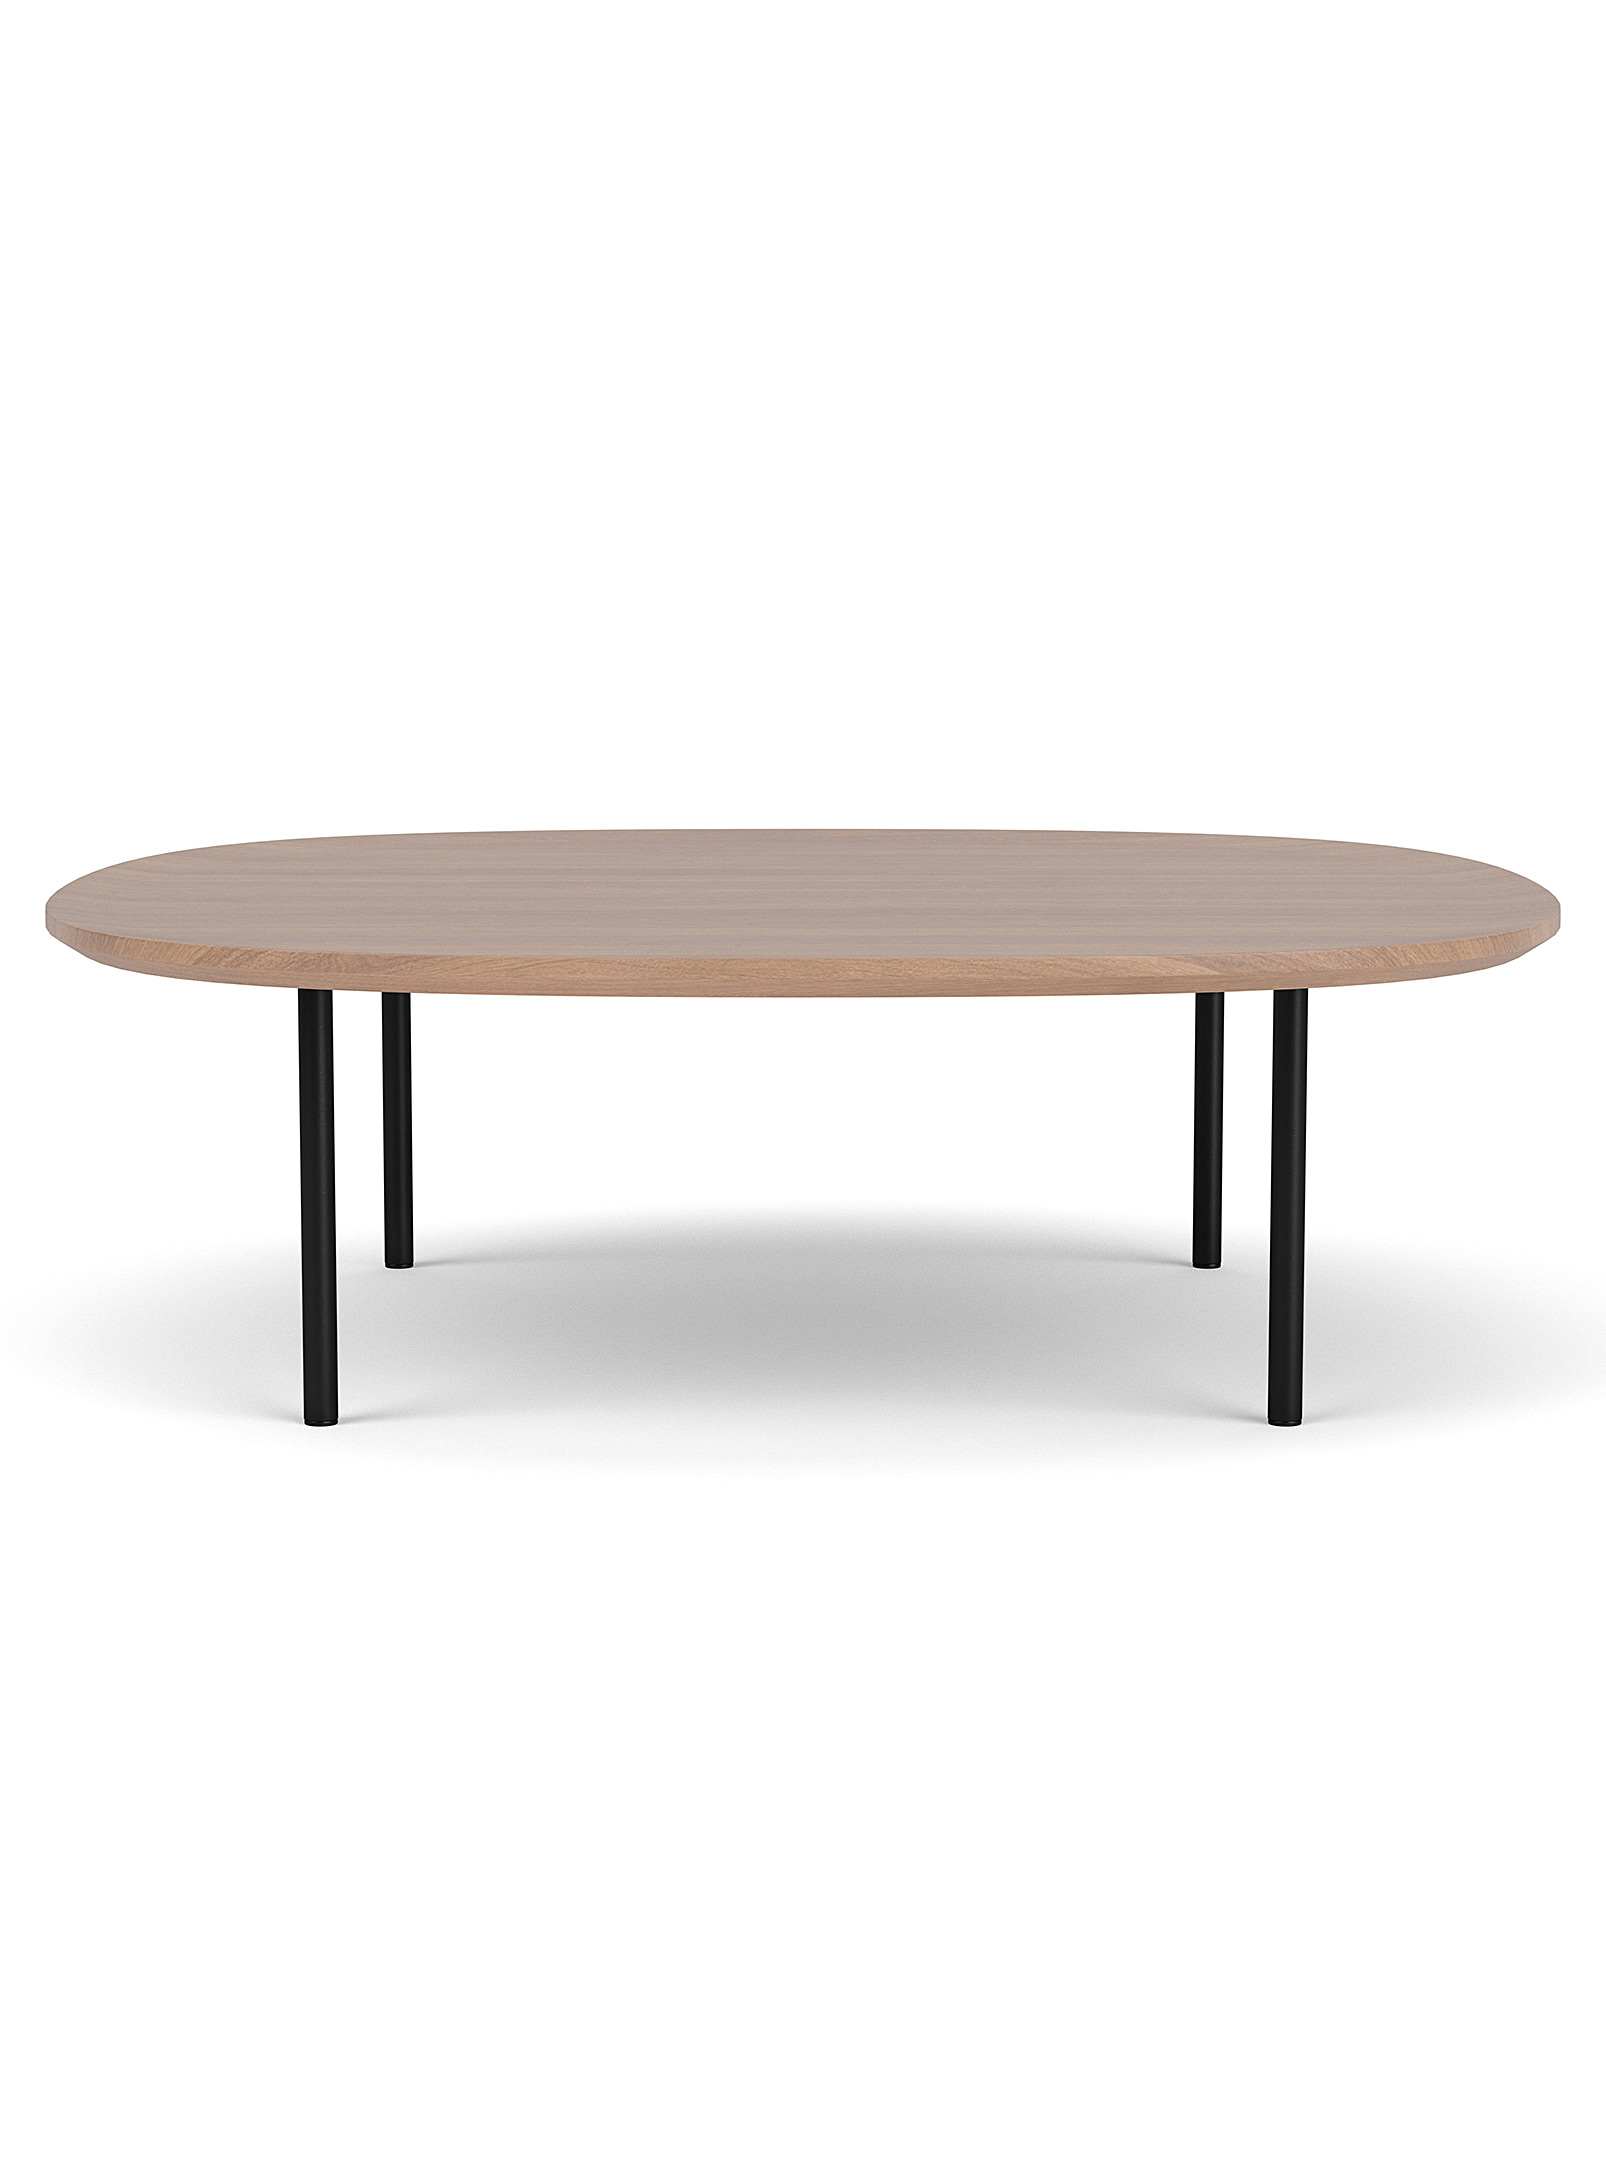 EQ3 - Rounded square coffee table